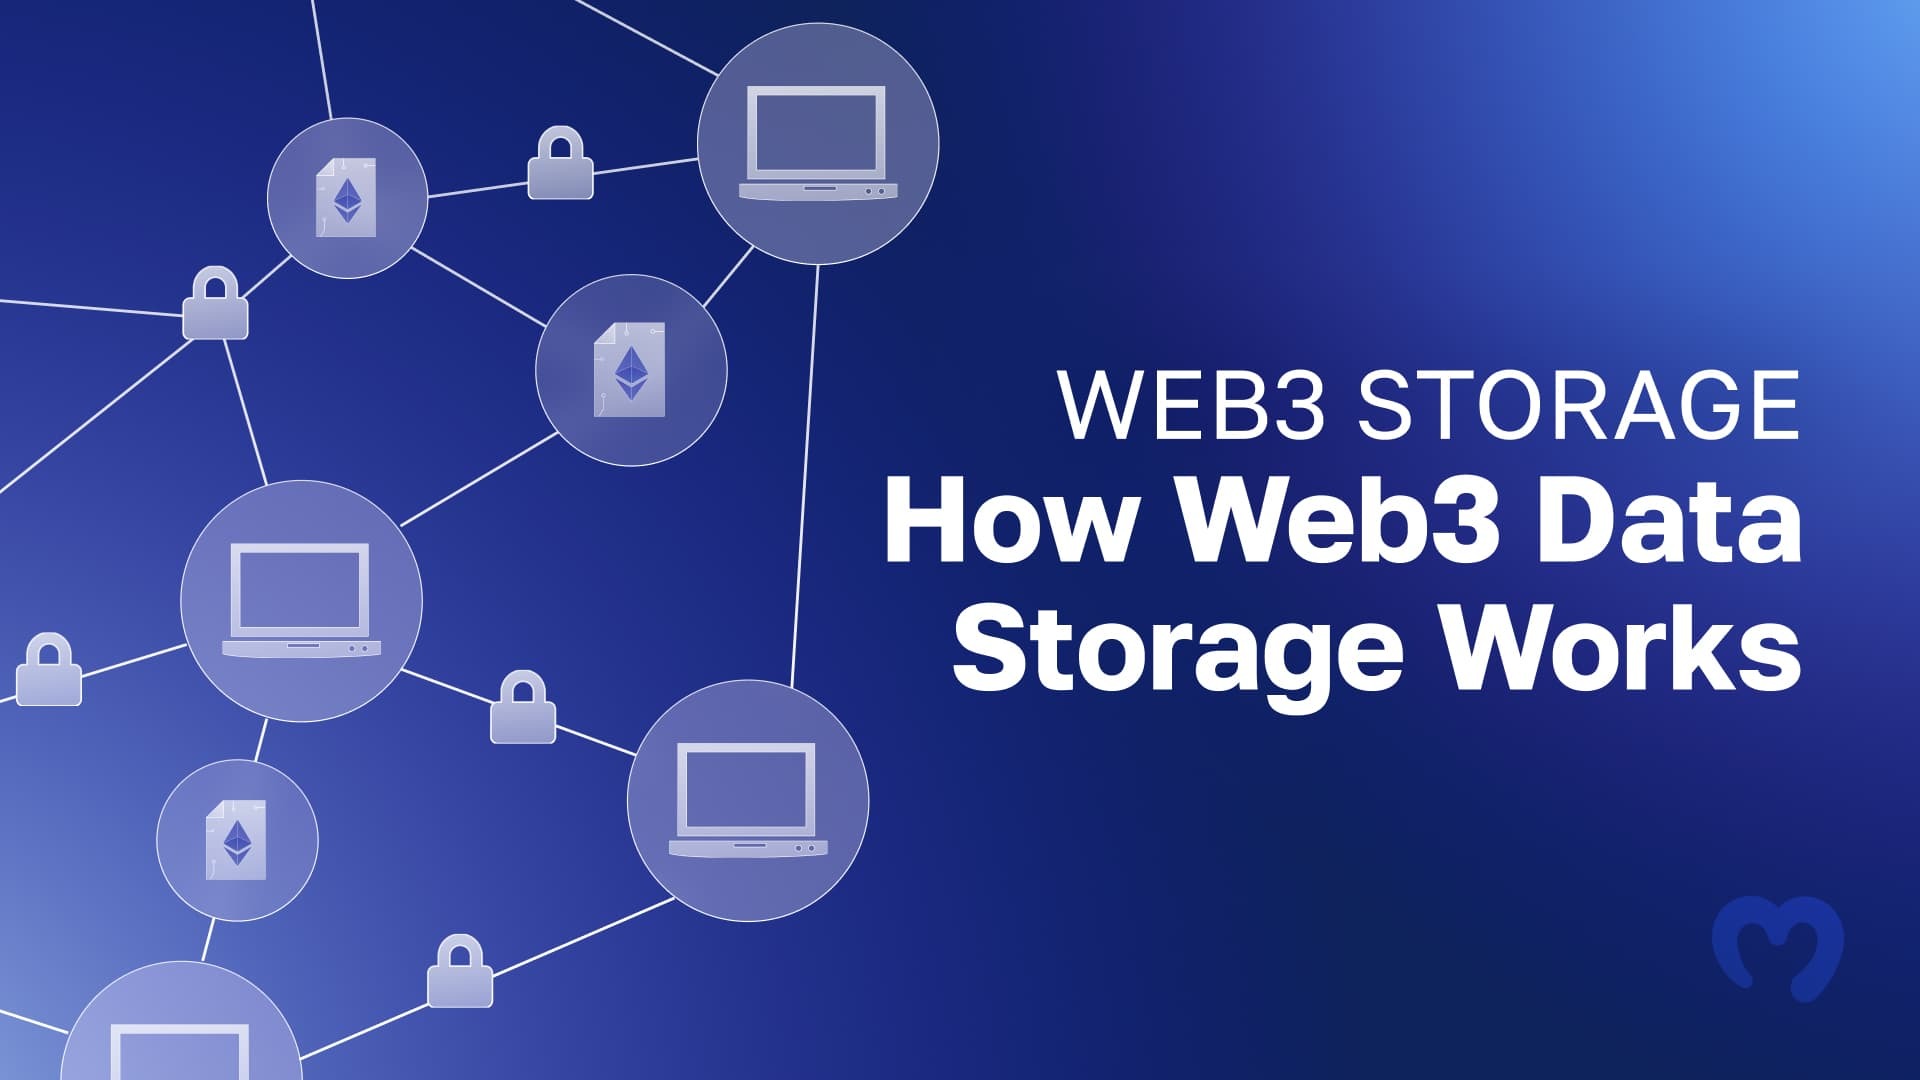 What is Web3 data storage?